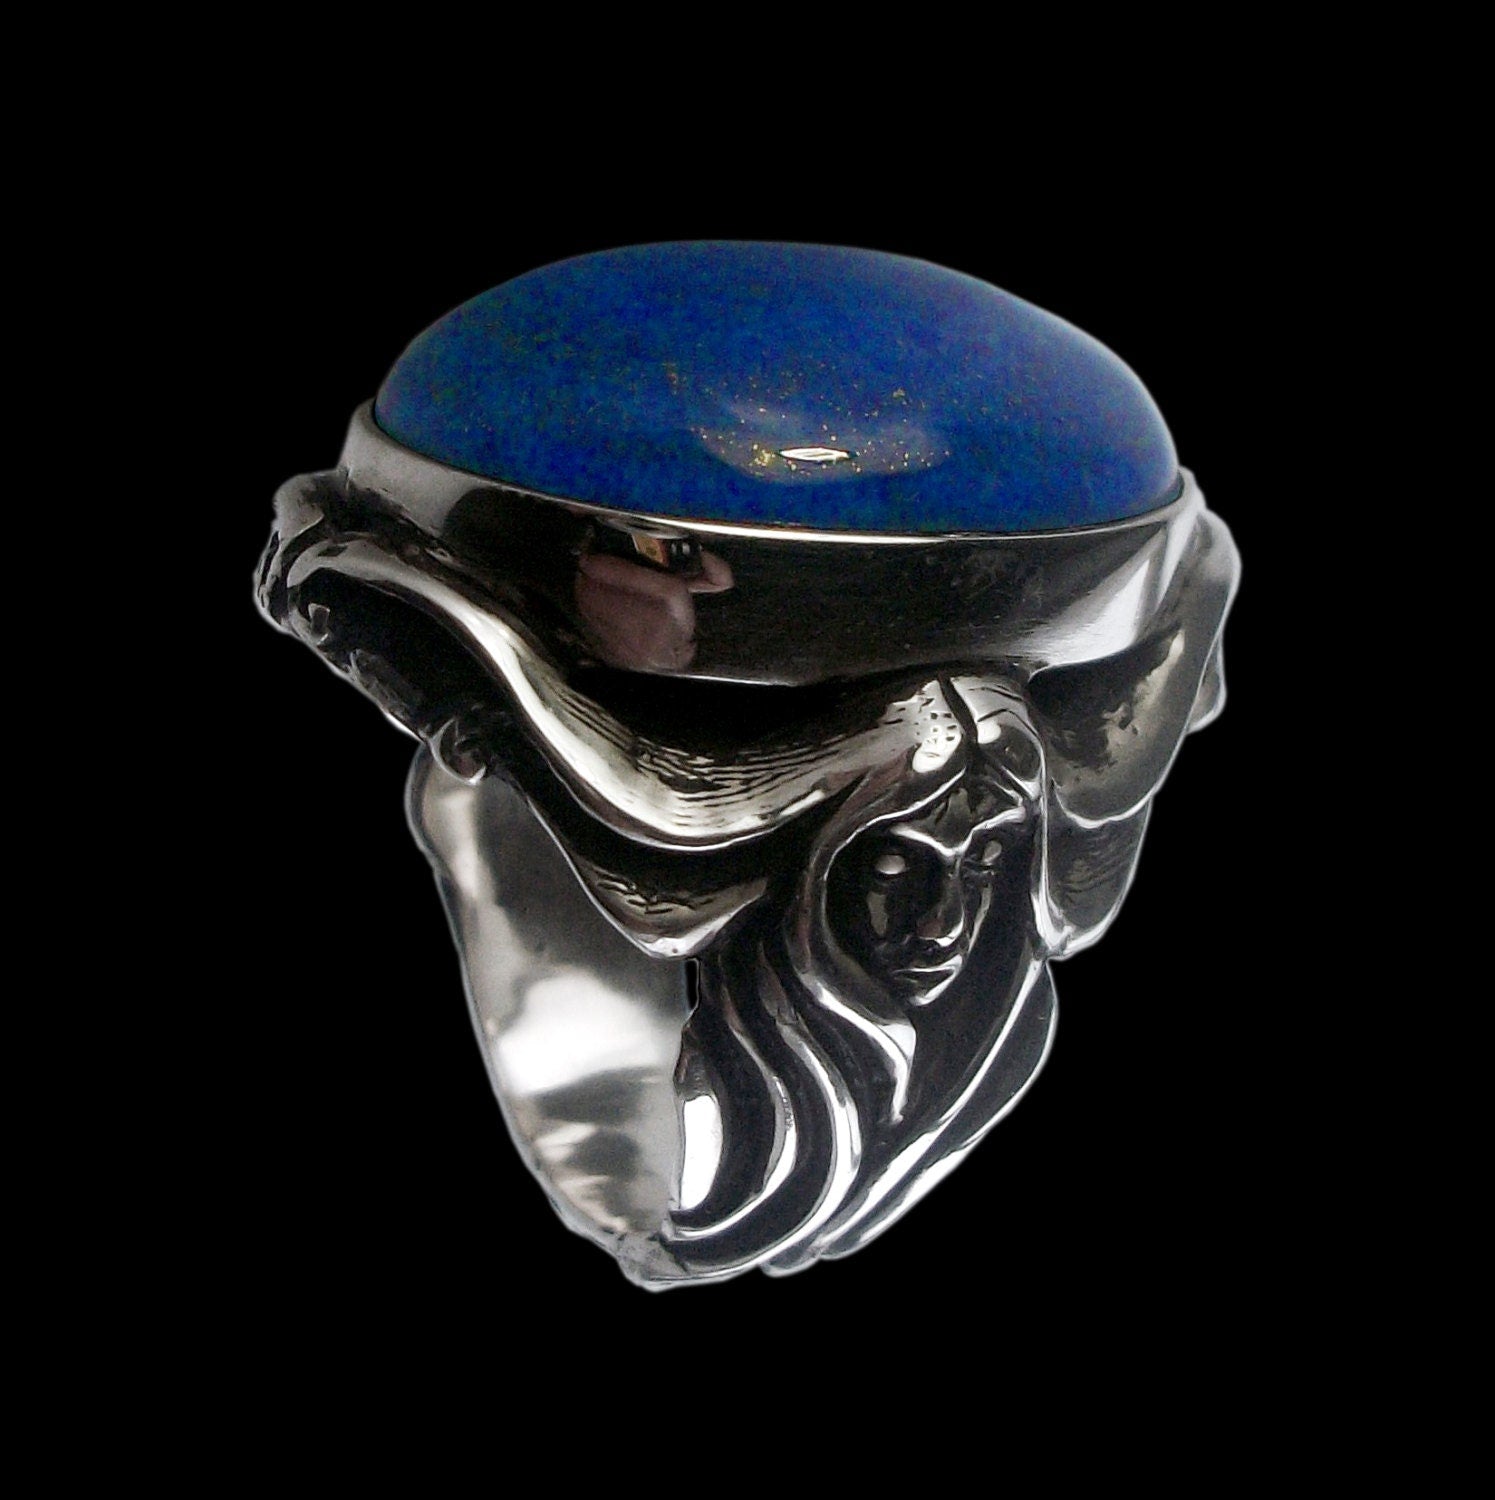 Lapis Lazuli ring - Sterling Silver Art Nouveau Ring with Lapis Lazuli - ALL Sizes